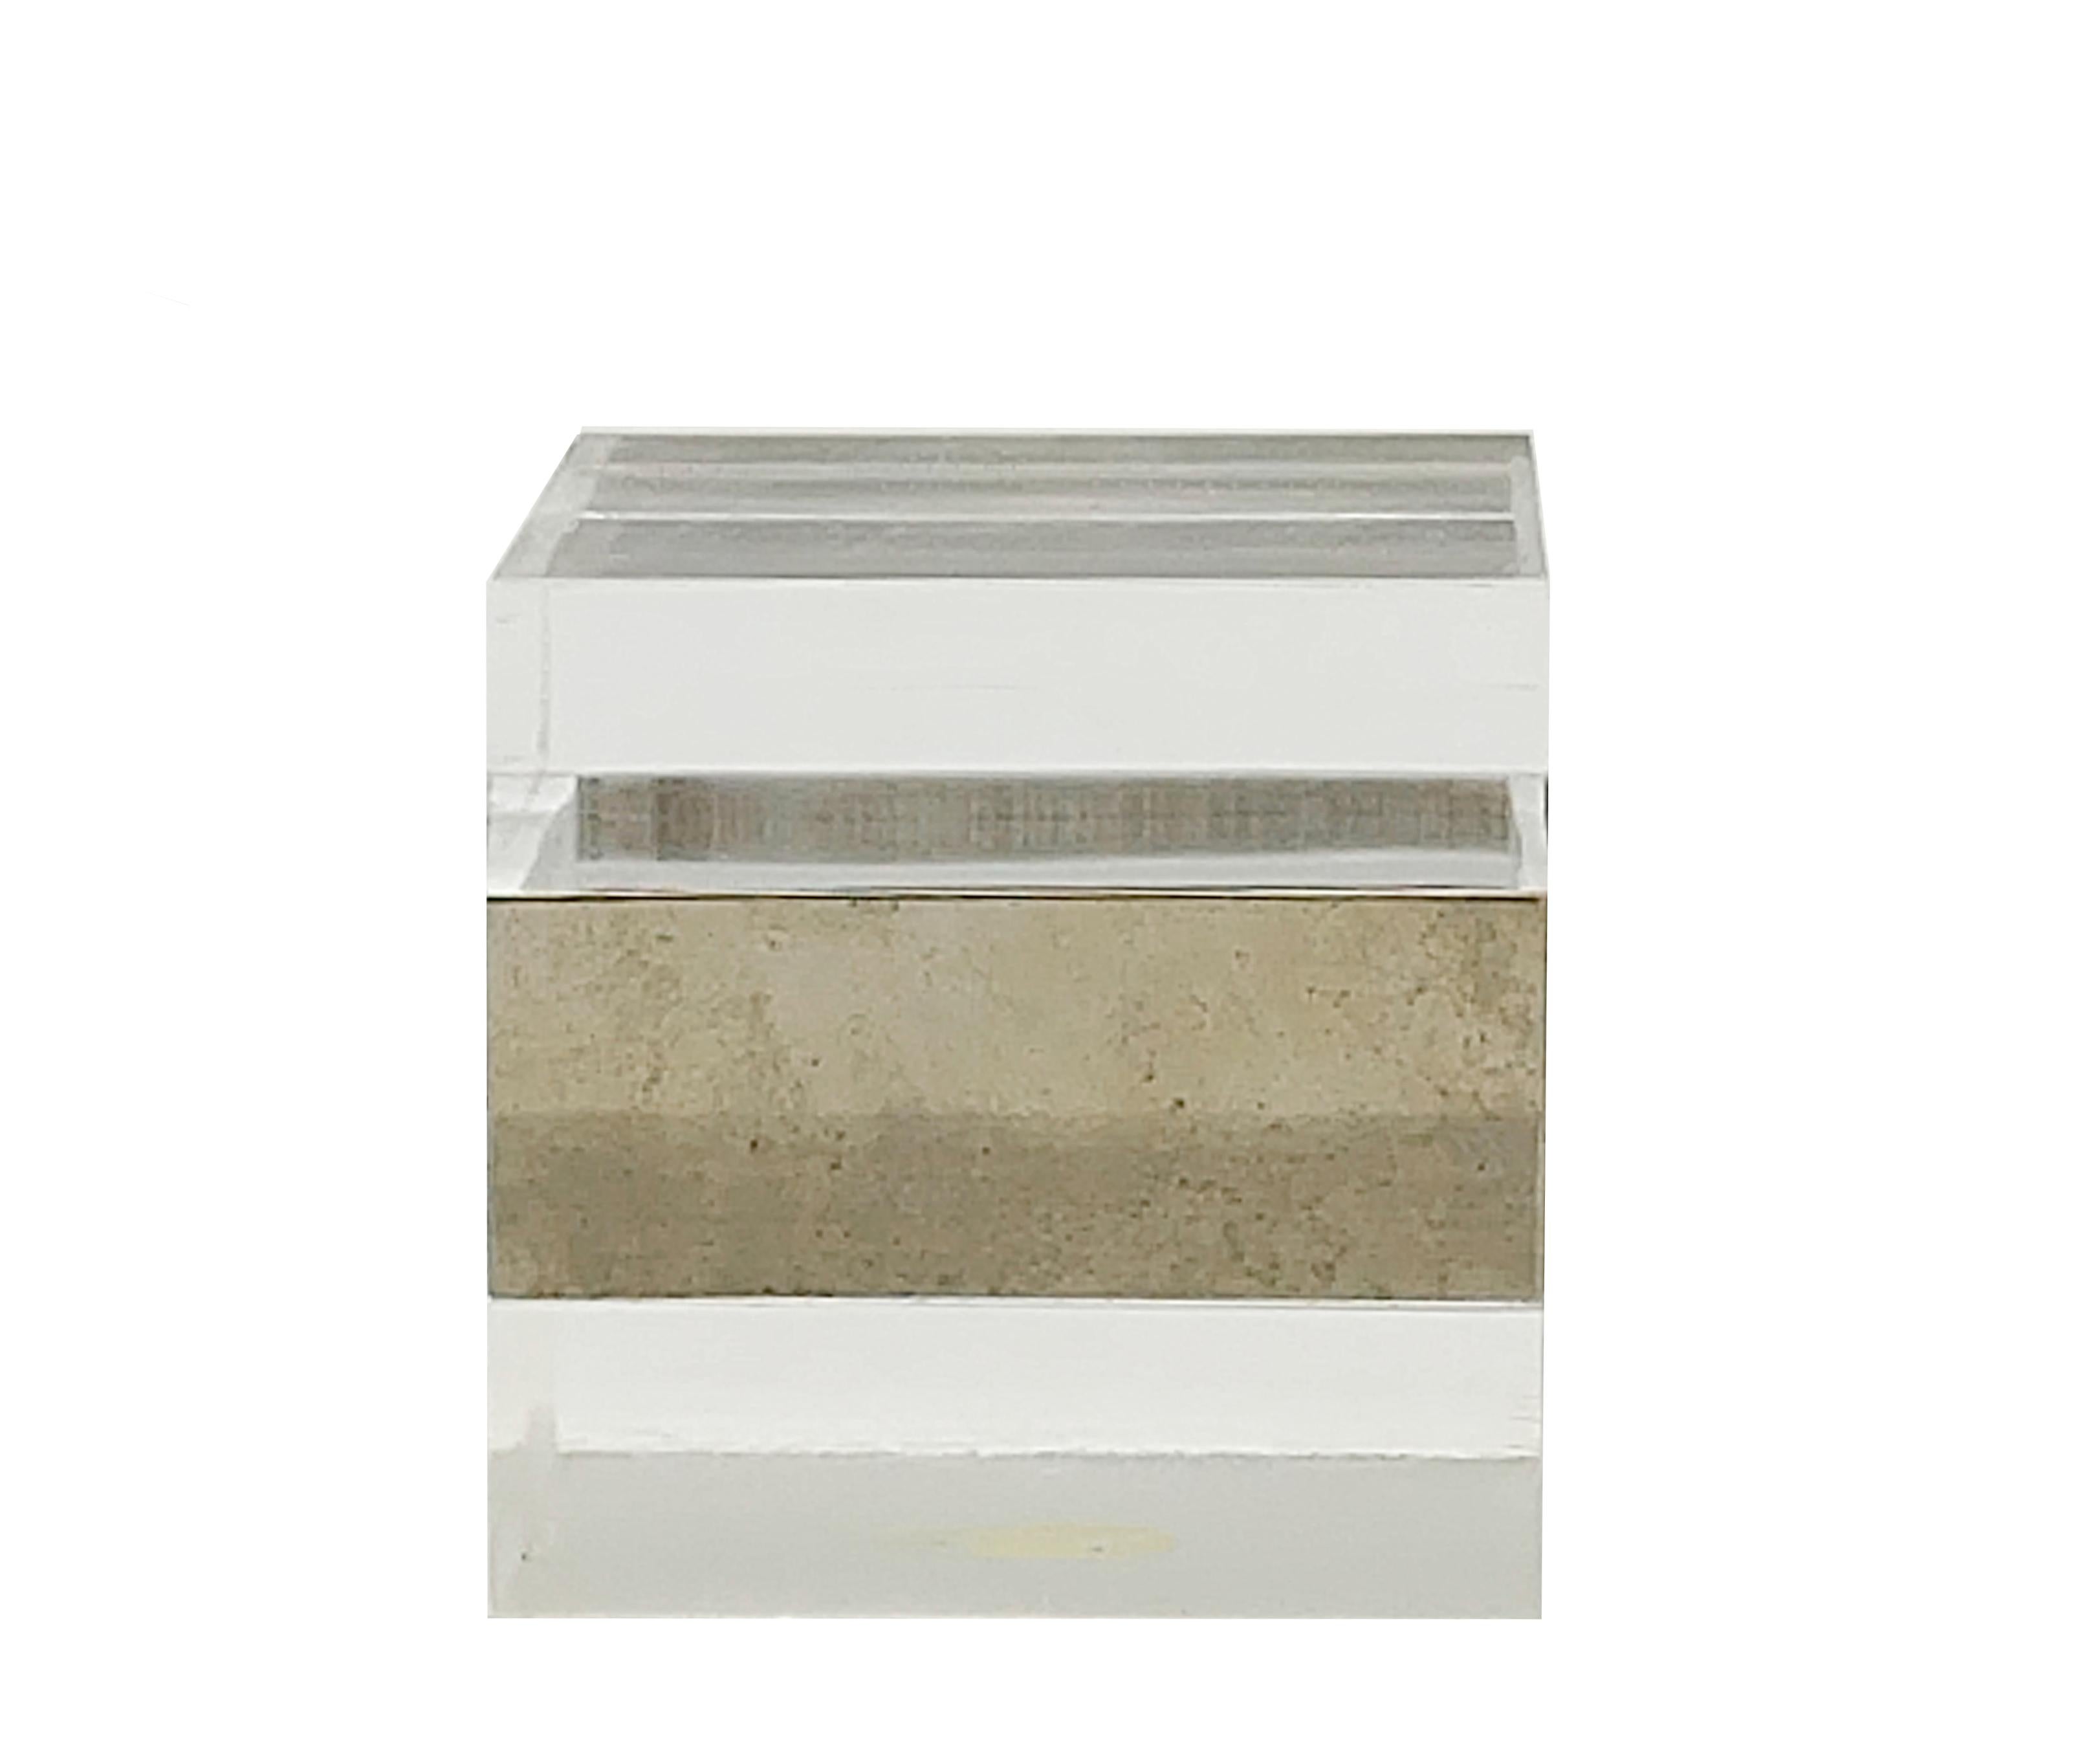 Rare decorative lucite and chrome cube-shaped box. Made in Italy in the 1970s.